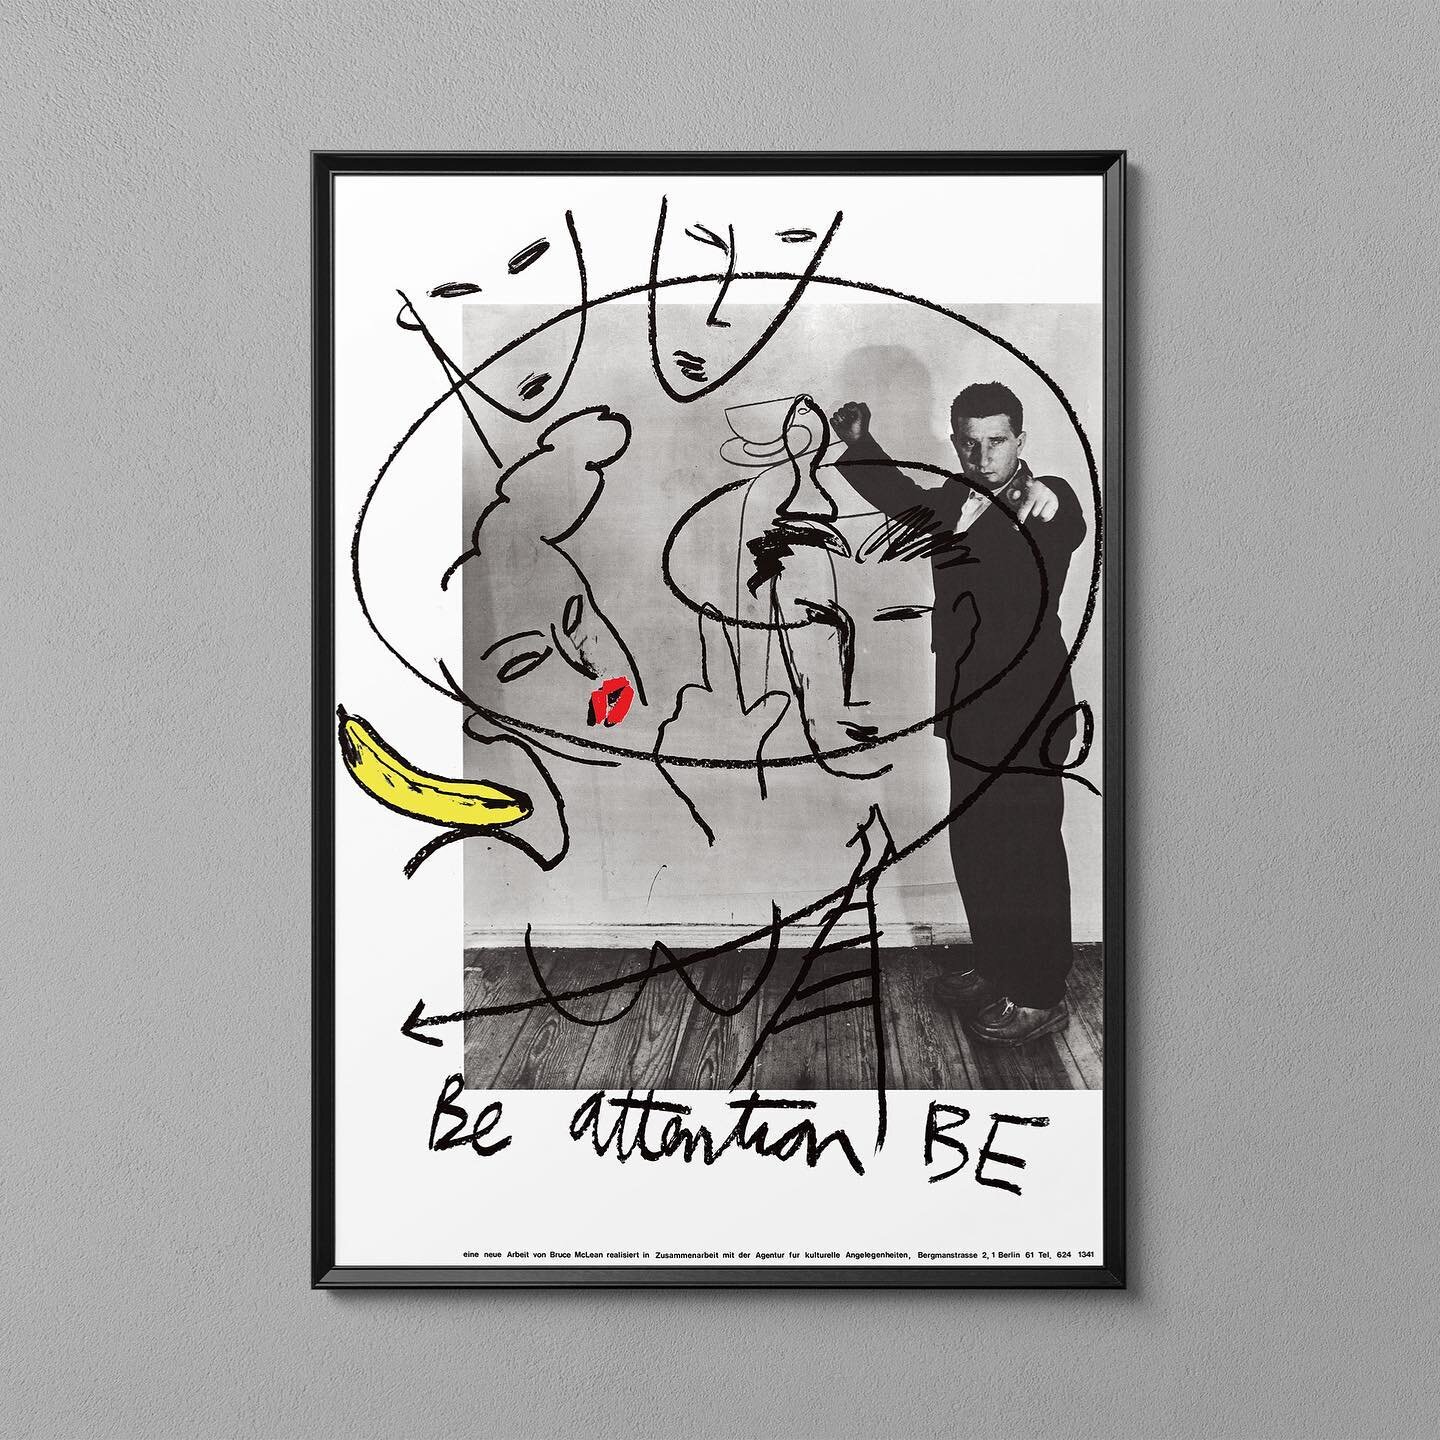 Available to buy exclusively at Department for Art. Bruce McLean, Be Attention Be Poster. Printed in Drukswerkstadtt to support the Agency for cultural affairs. Berlin &ndash; 1982.
.
Department for Art (DFA) are pleased to announce the release of a 